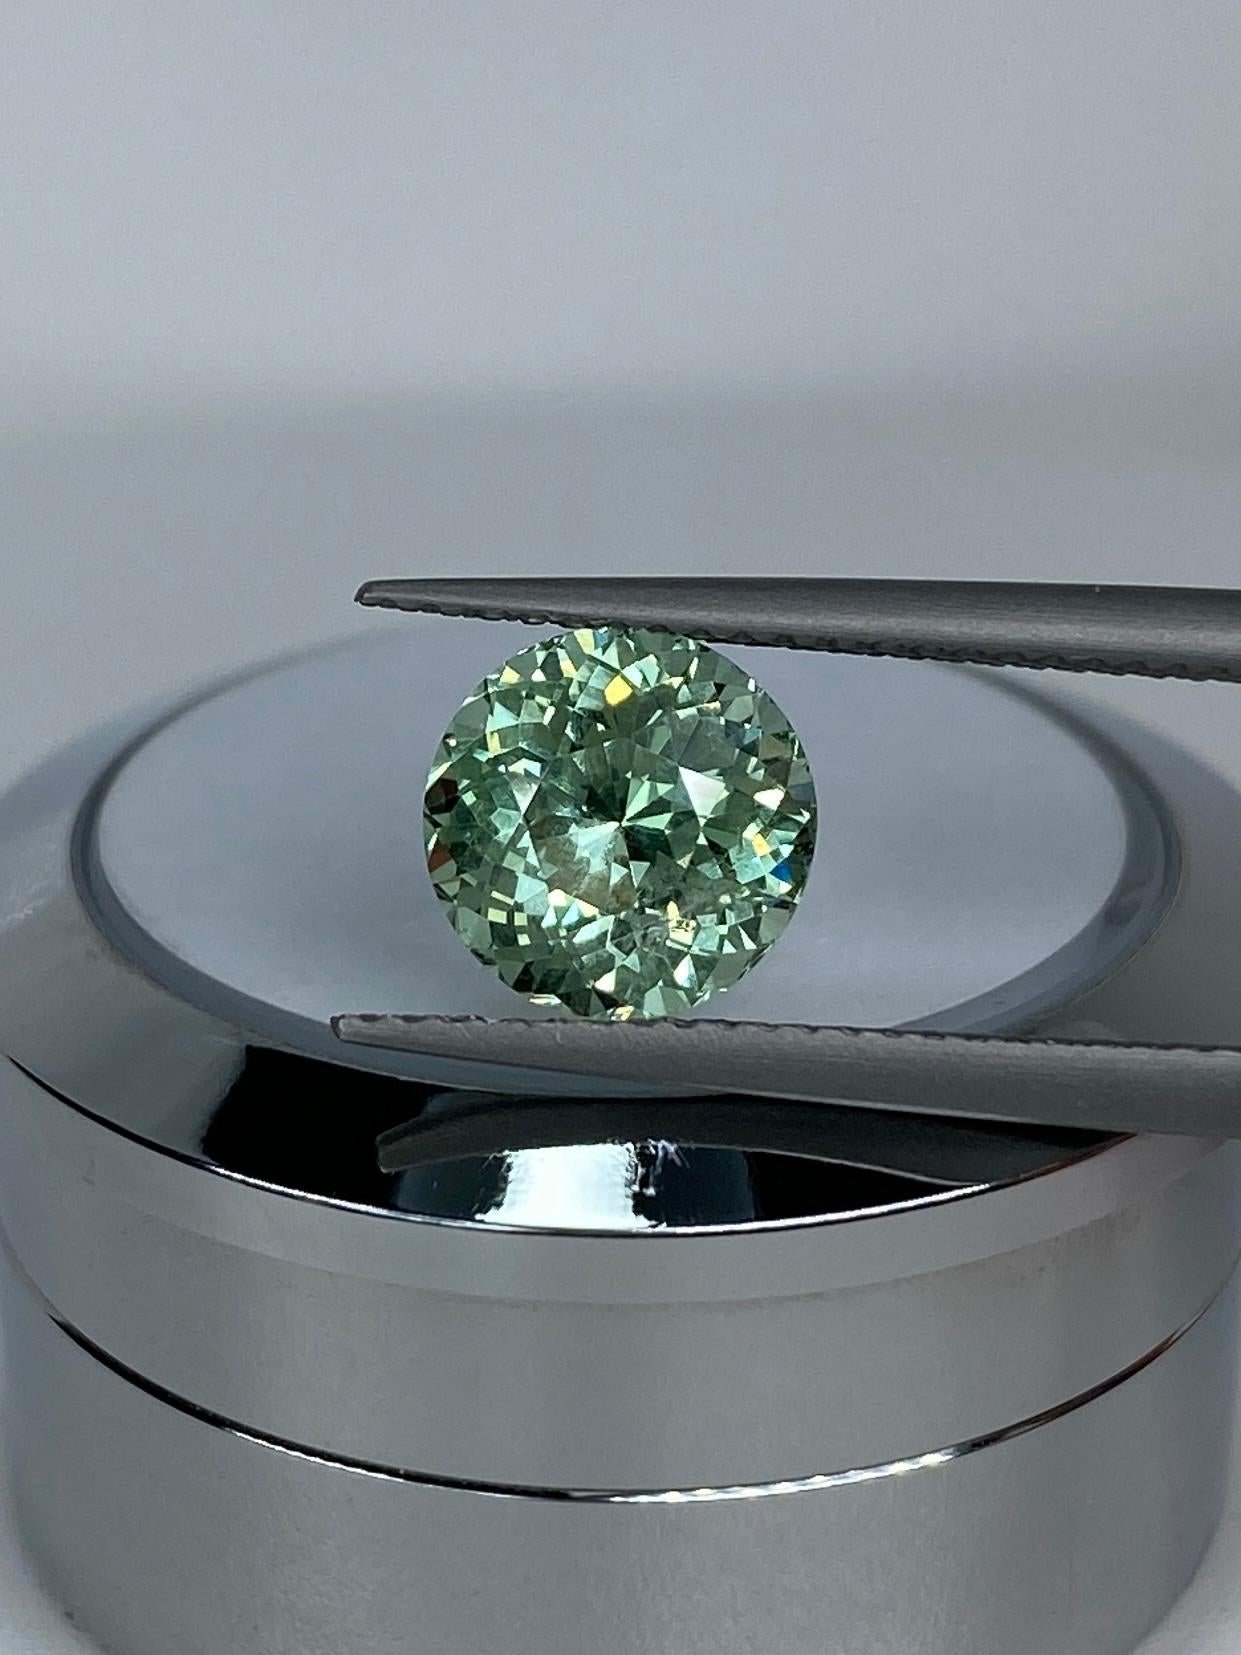 The Sapphire Merchant proudly presents this natural Merelani Mint Garnet, a rare gemstone coveted for its exceptional beauty and scarcity. Weighing 2.54 carats and cut into a mesmerizing round brilliant cut, it emanates a dazzling brilliance that